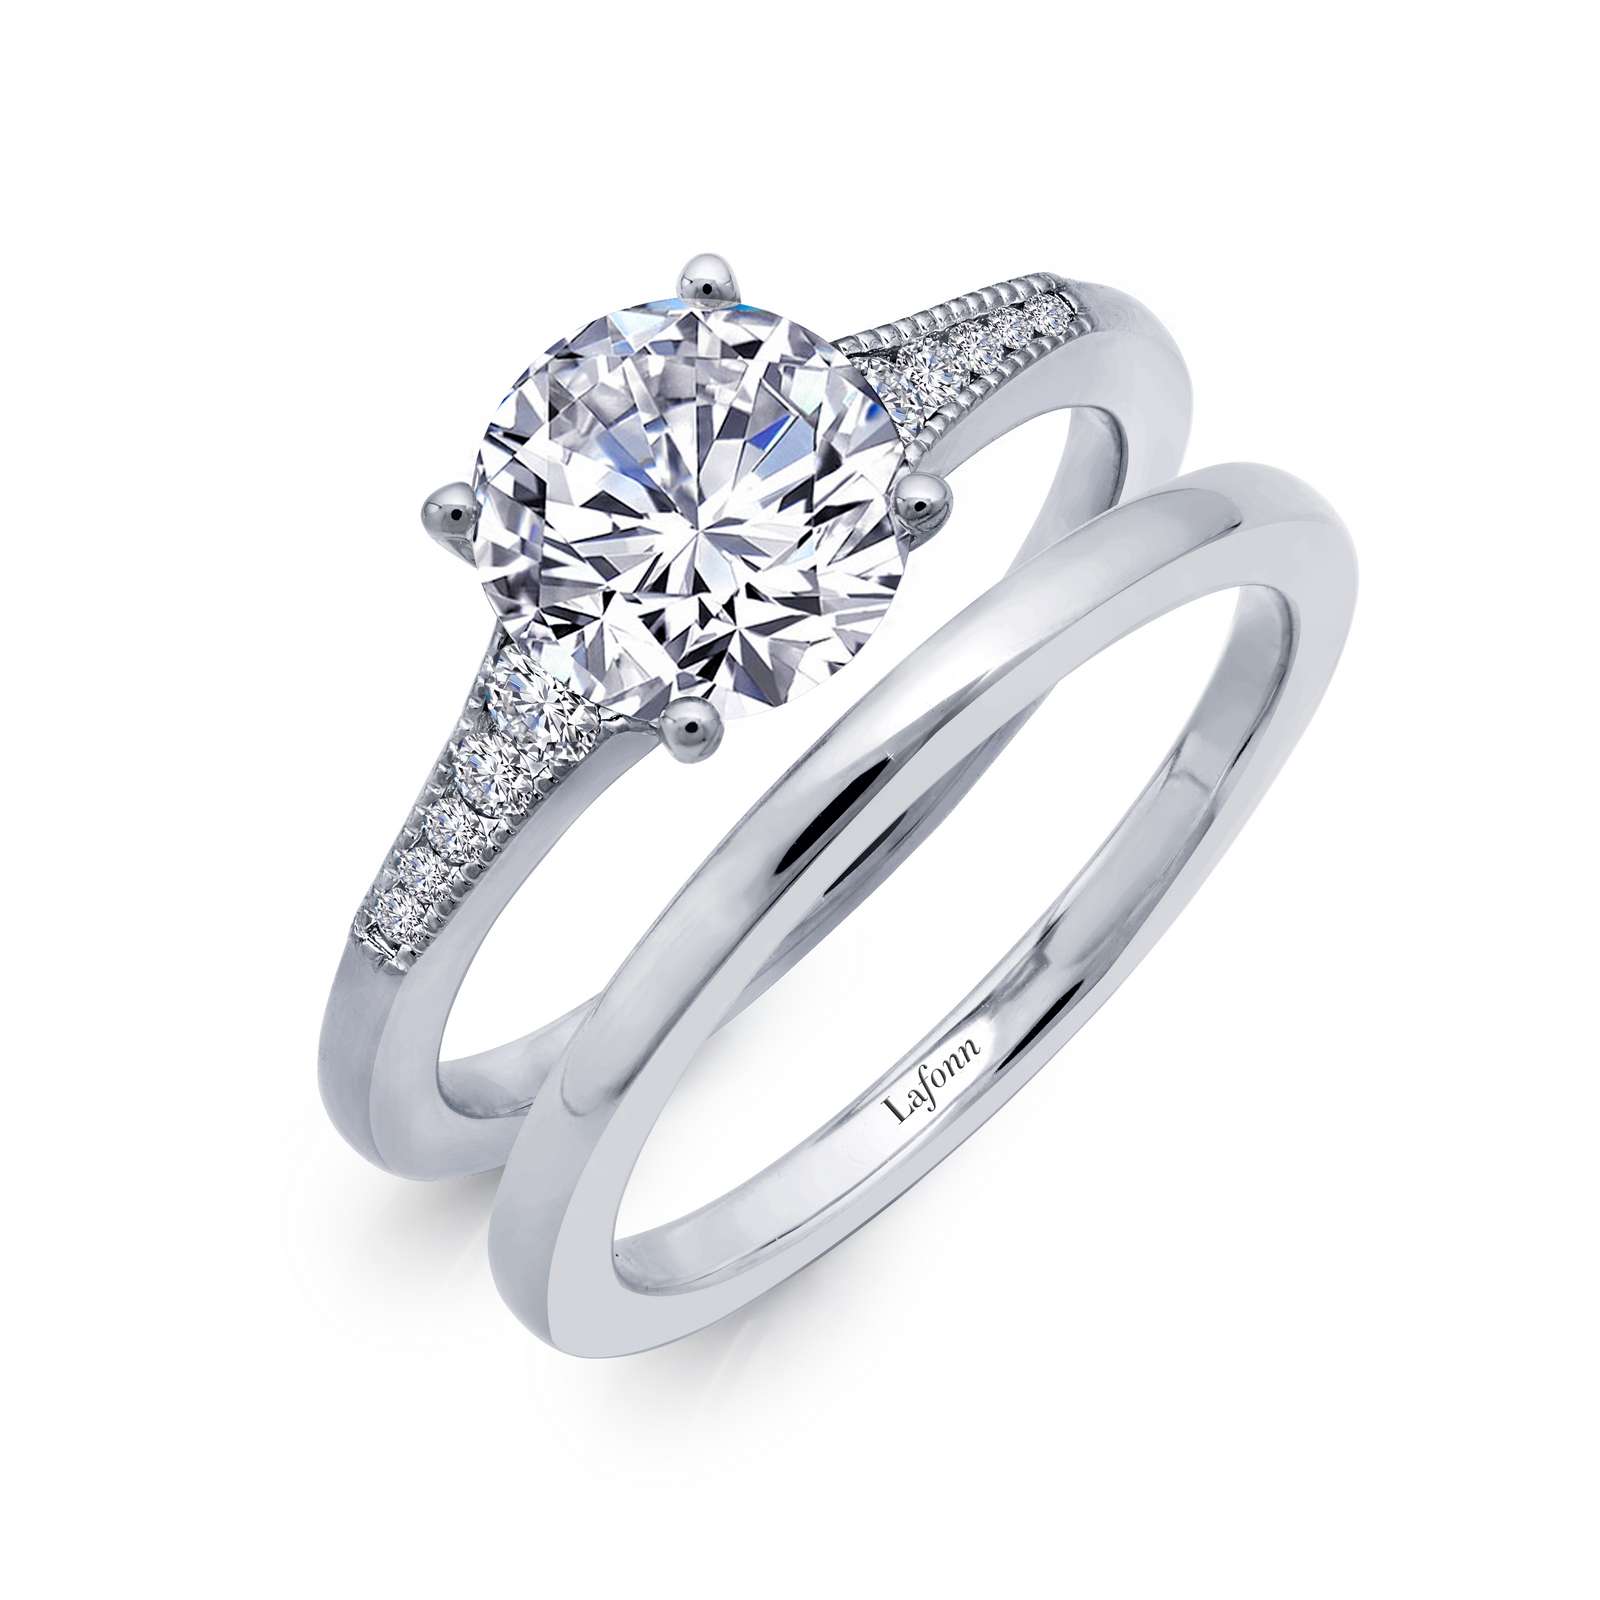 Engagement Ring with Wedding Band Griner Jewelry Co. Moultrie, GA